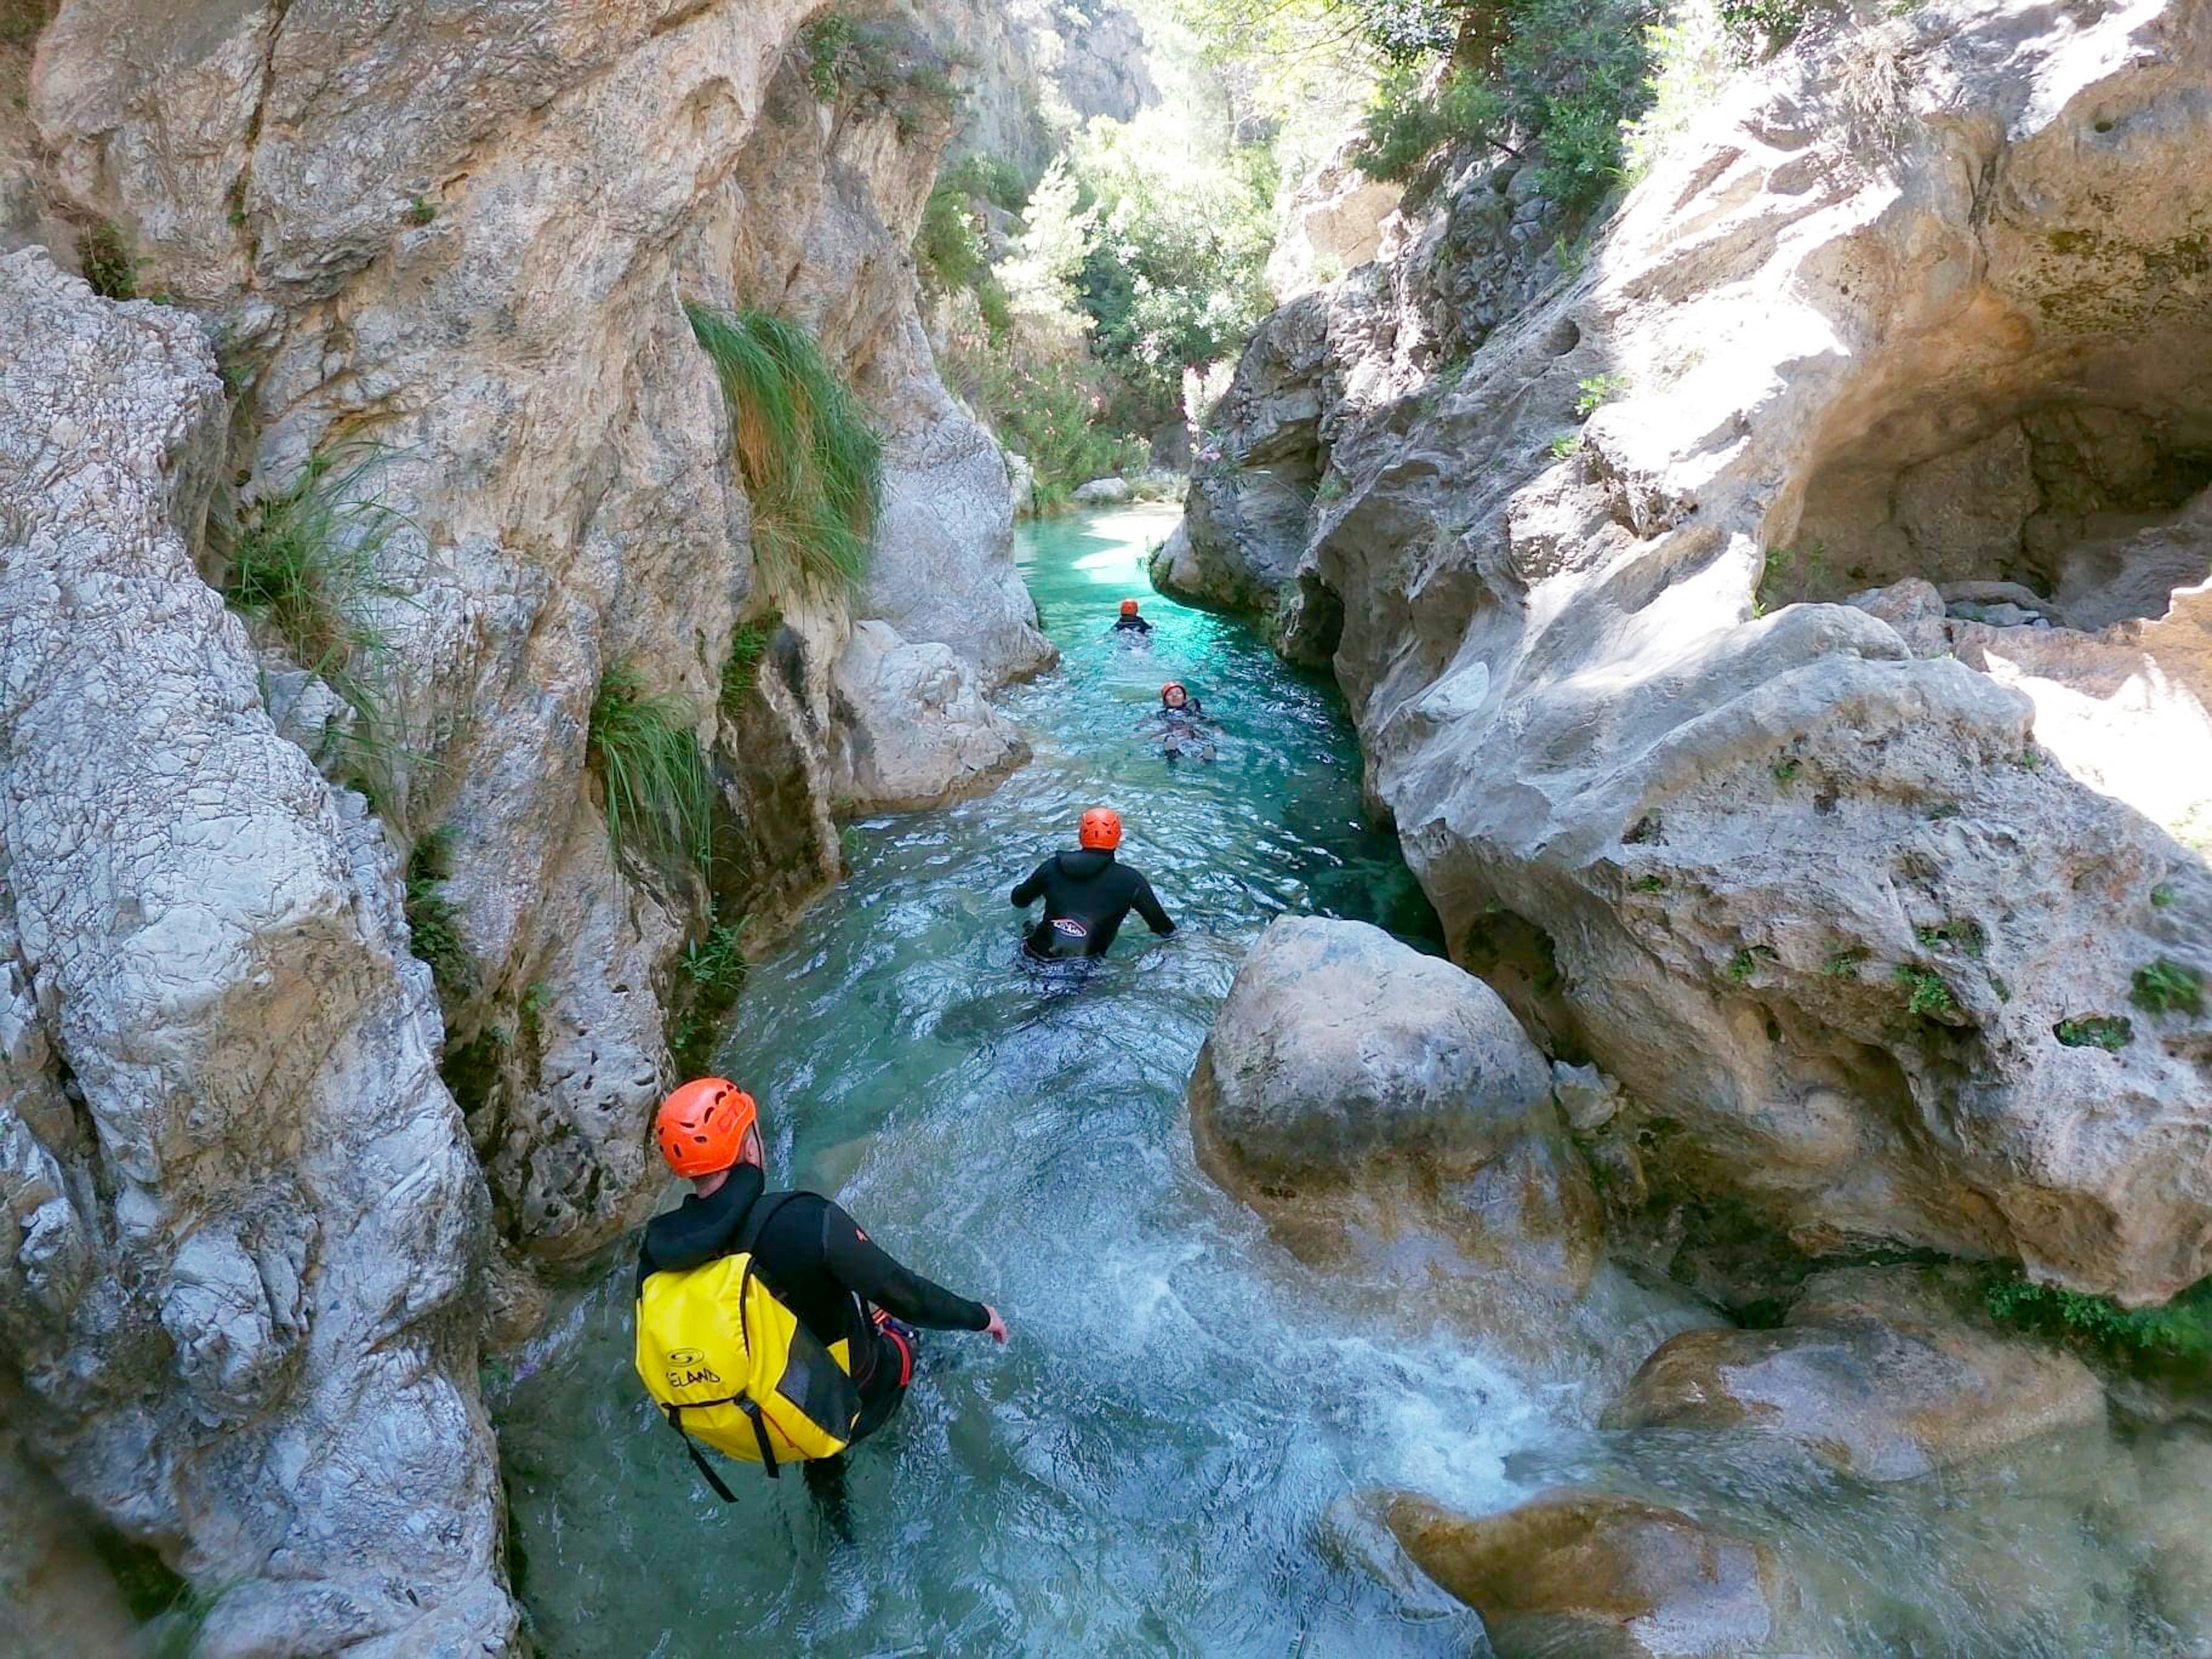 For an exhilerating natural adventure, try canyoning through Spain's steep-walled mountain passes.